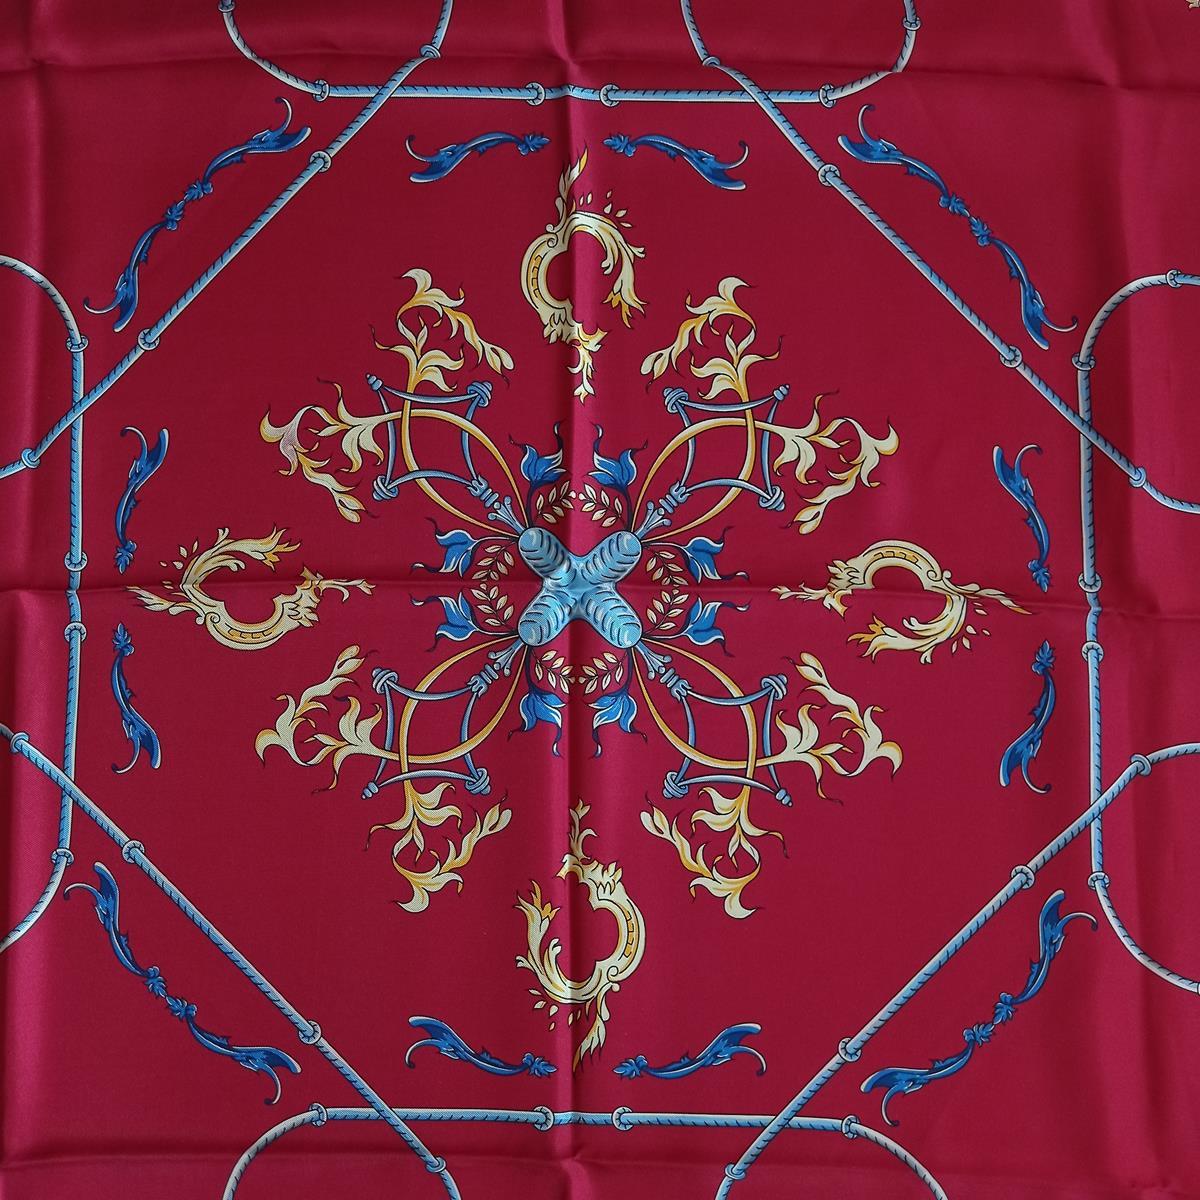 Beutiful E. Marinella Napoli scarf
Silk
Ruby base, golden and blue pattern
Cm 88 x 88 (34.6 x 34.6 inches)
Original price € 250
Made in Italy
Worldwide express shipping included in the price !